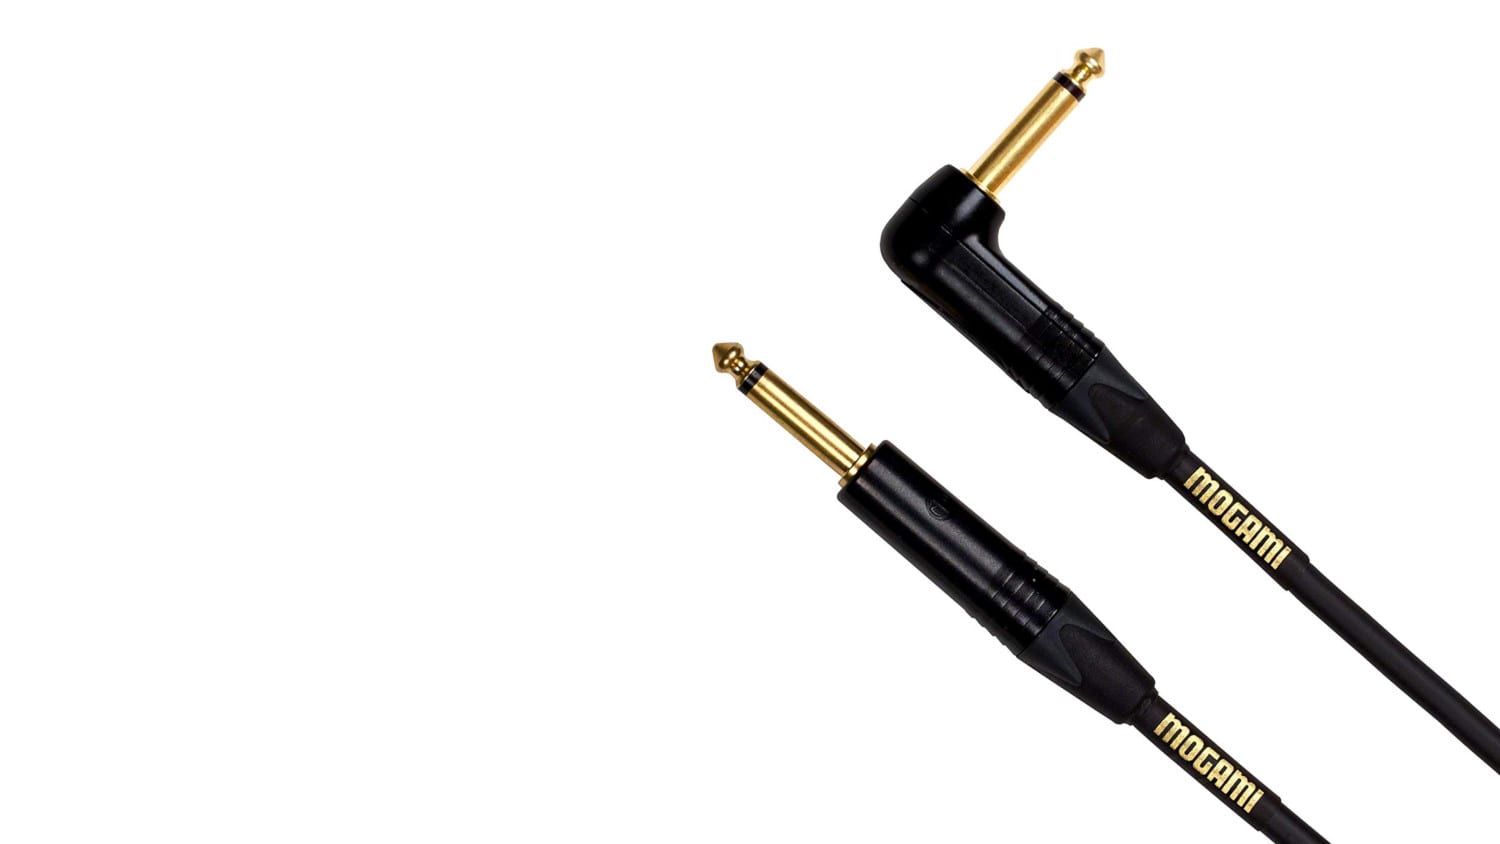 Mogami Gold Instrument Cable